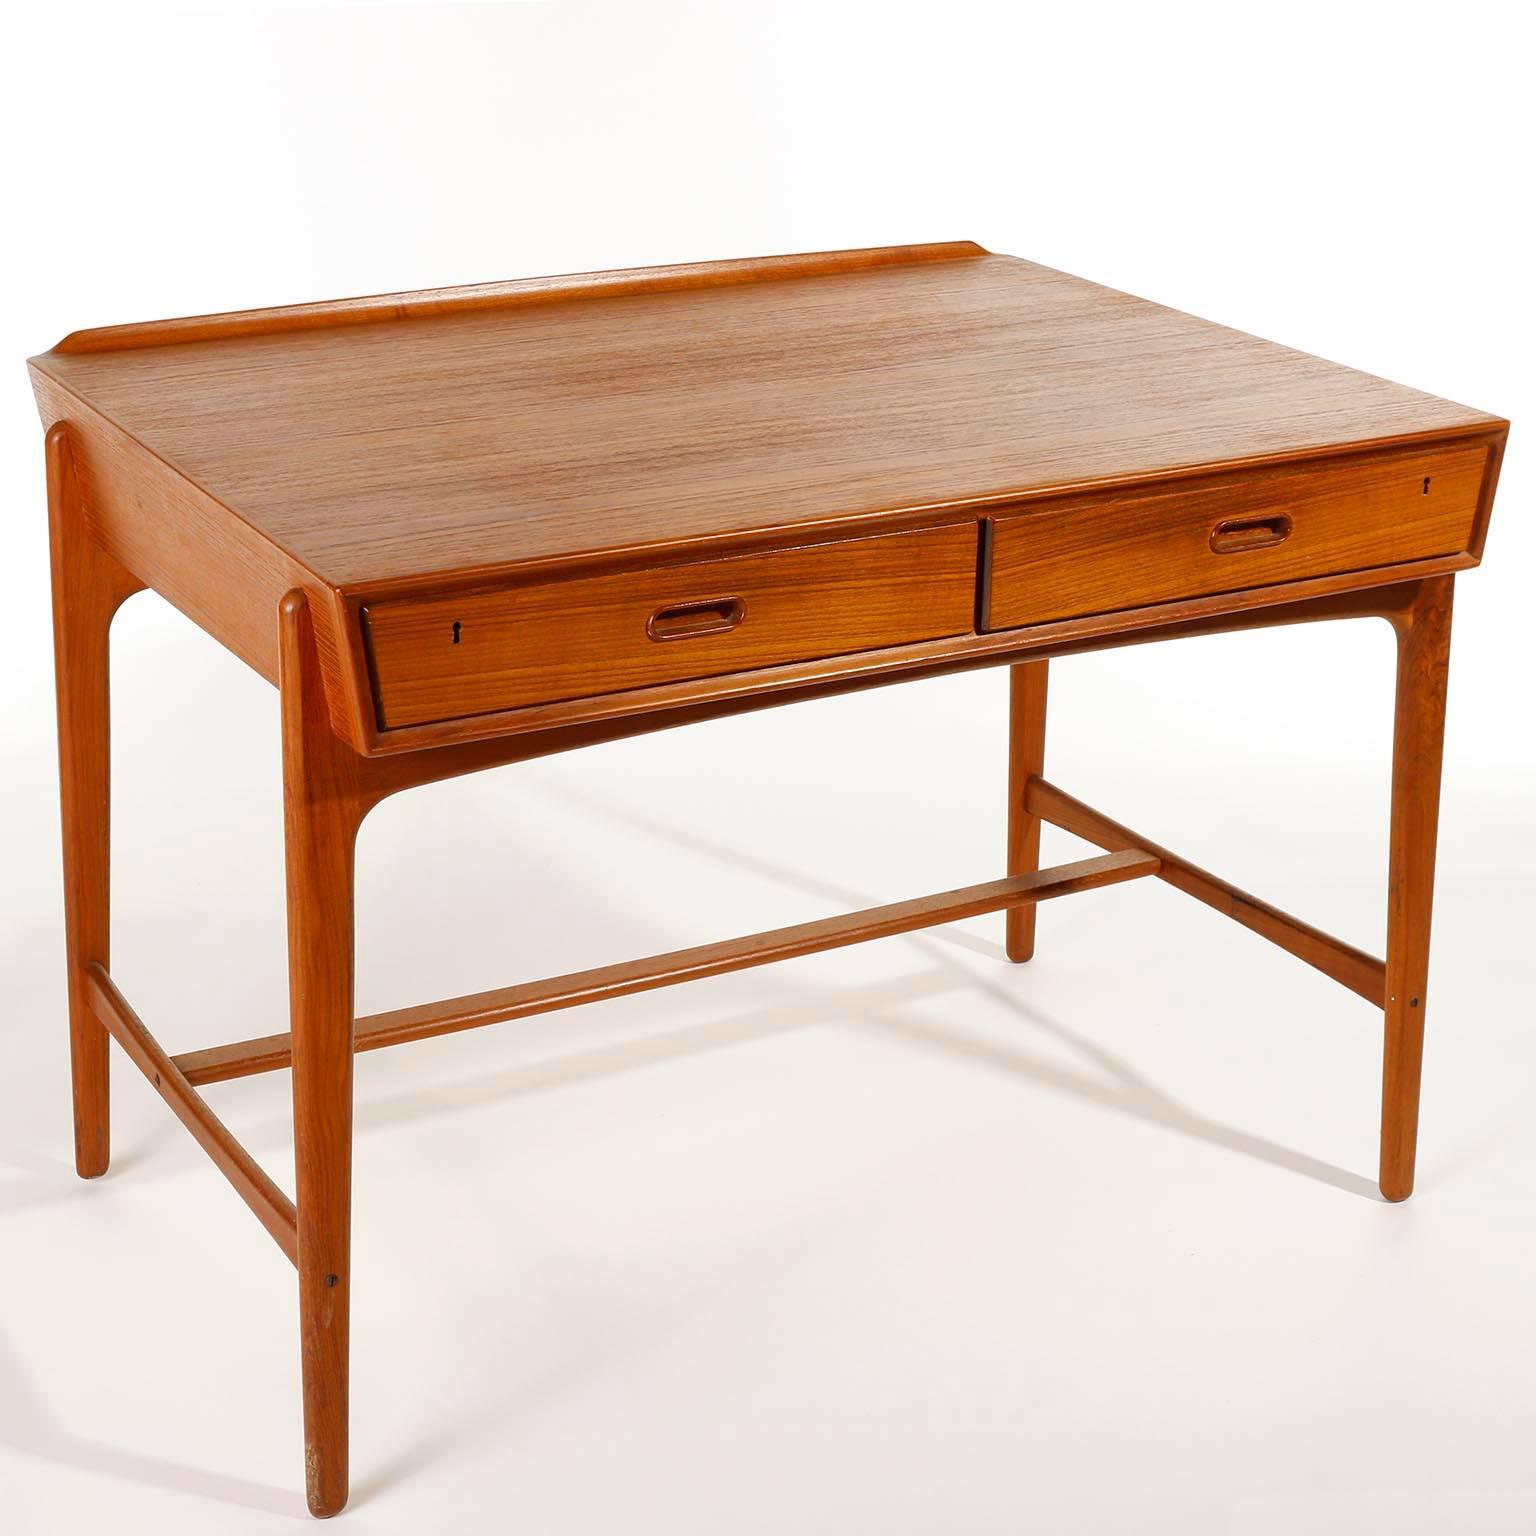 A gorgeous freestanding writing desk by Danish architect Svend Aage Madsen for Sigurd Hansens Møbelfabrik, Denmark, manufactured in Mid-Century, circa 1960 (late 1950s or early 1960s).
The table is labeled and it is in excellent condition. It has